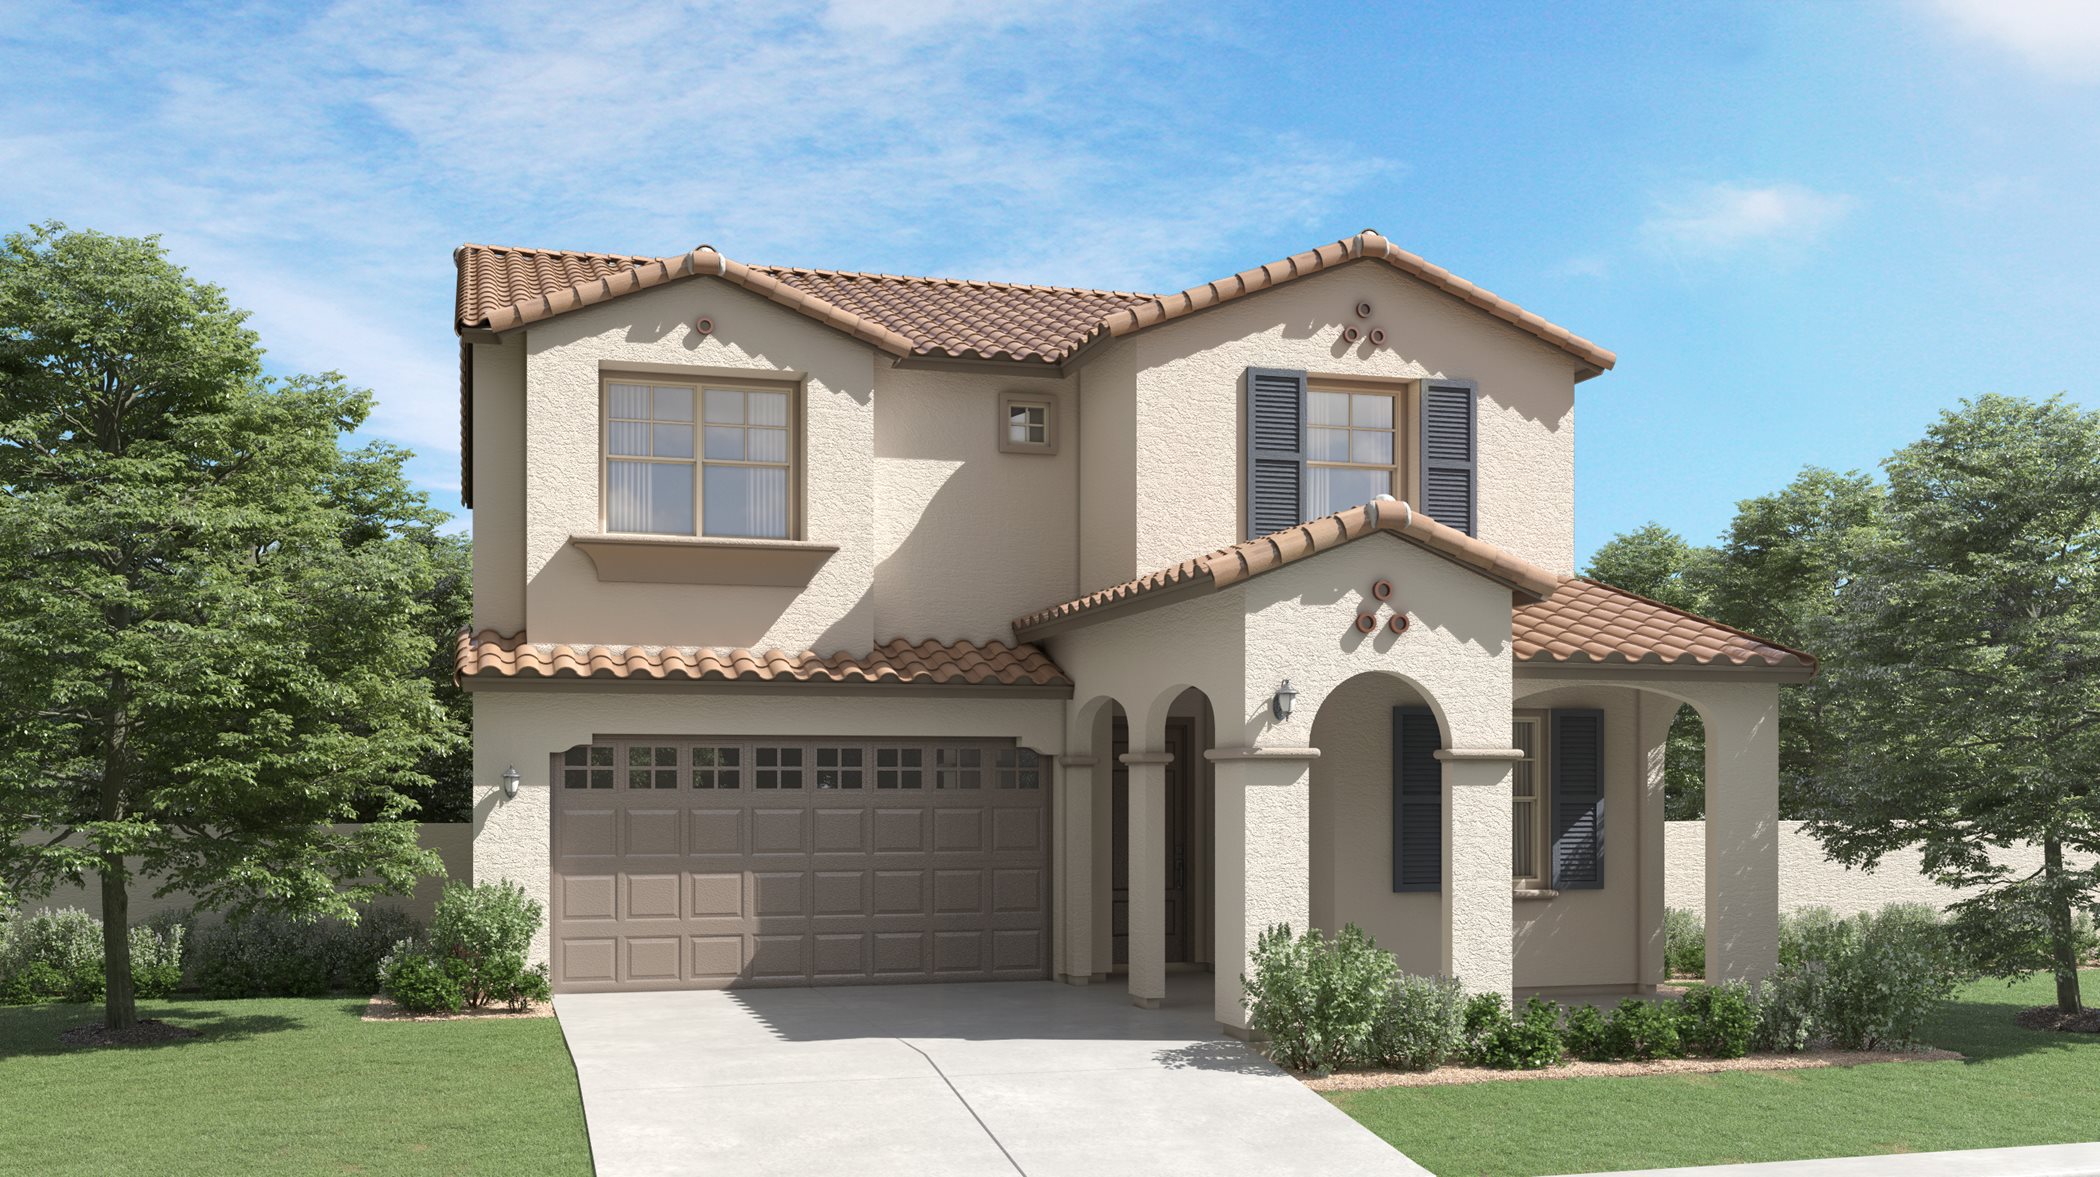 Spanish Colonial Exterior for Plan 3524